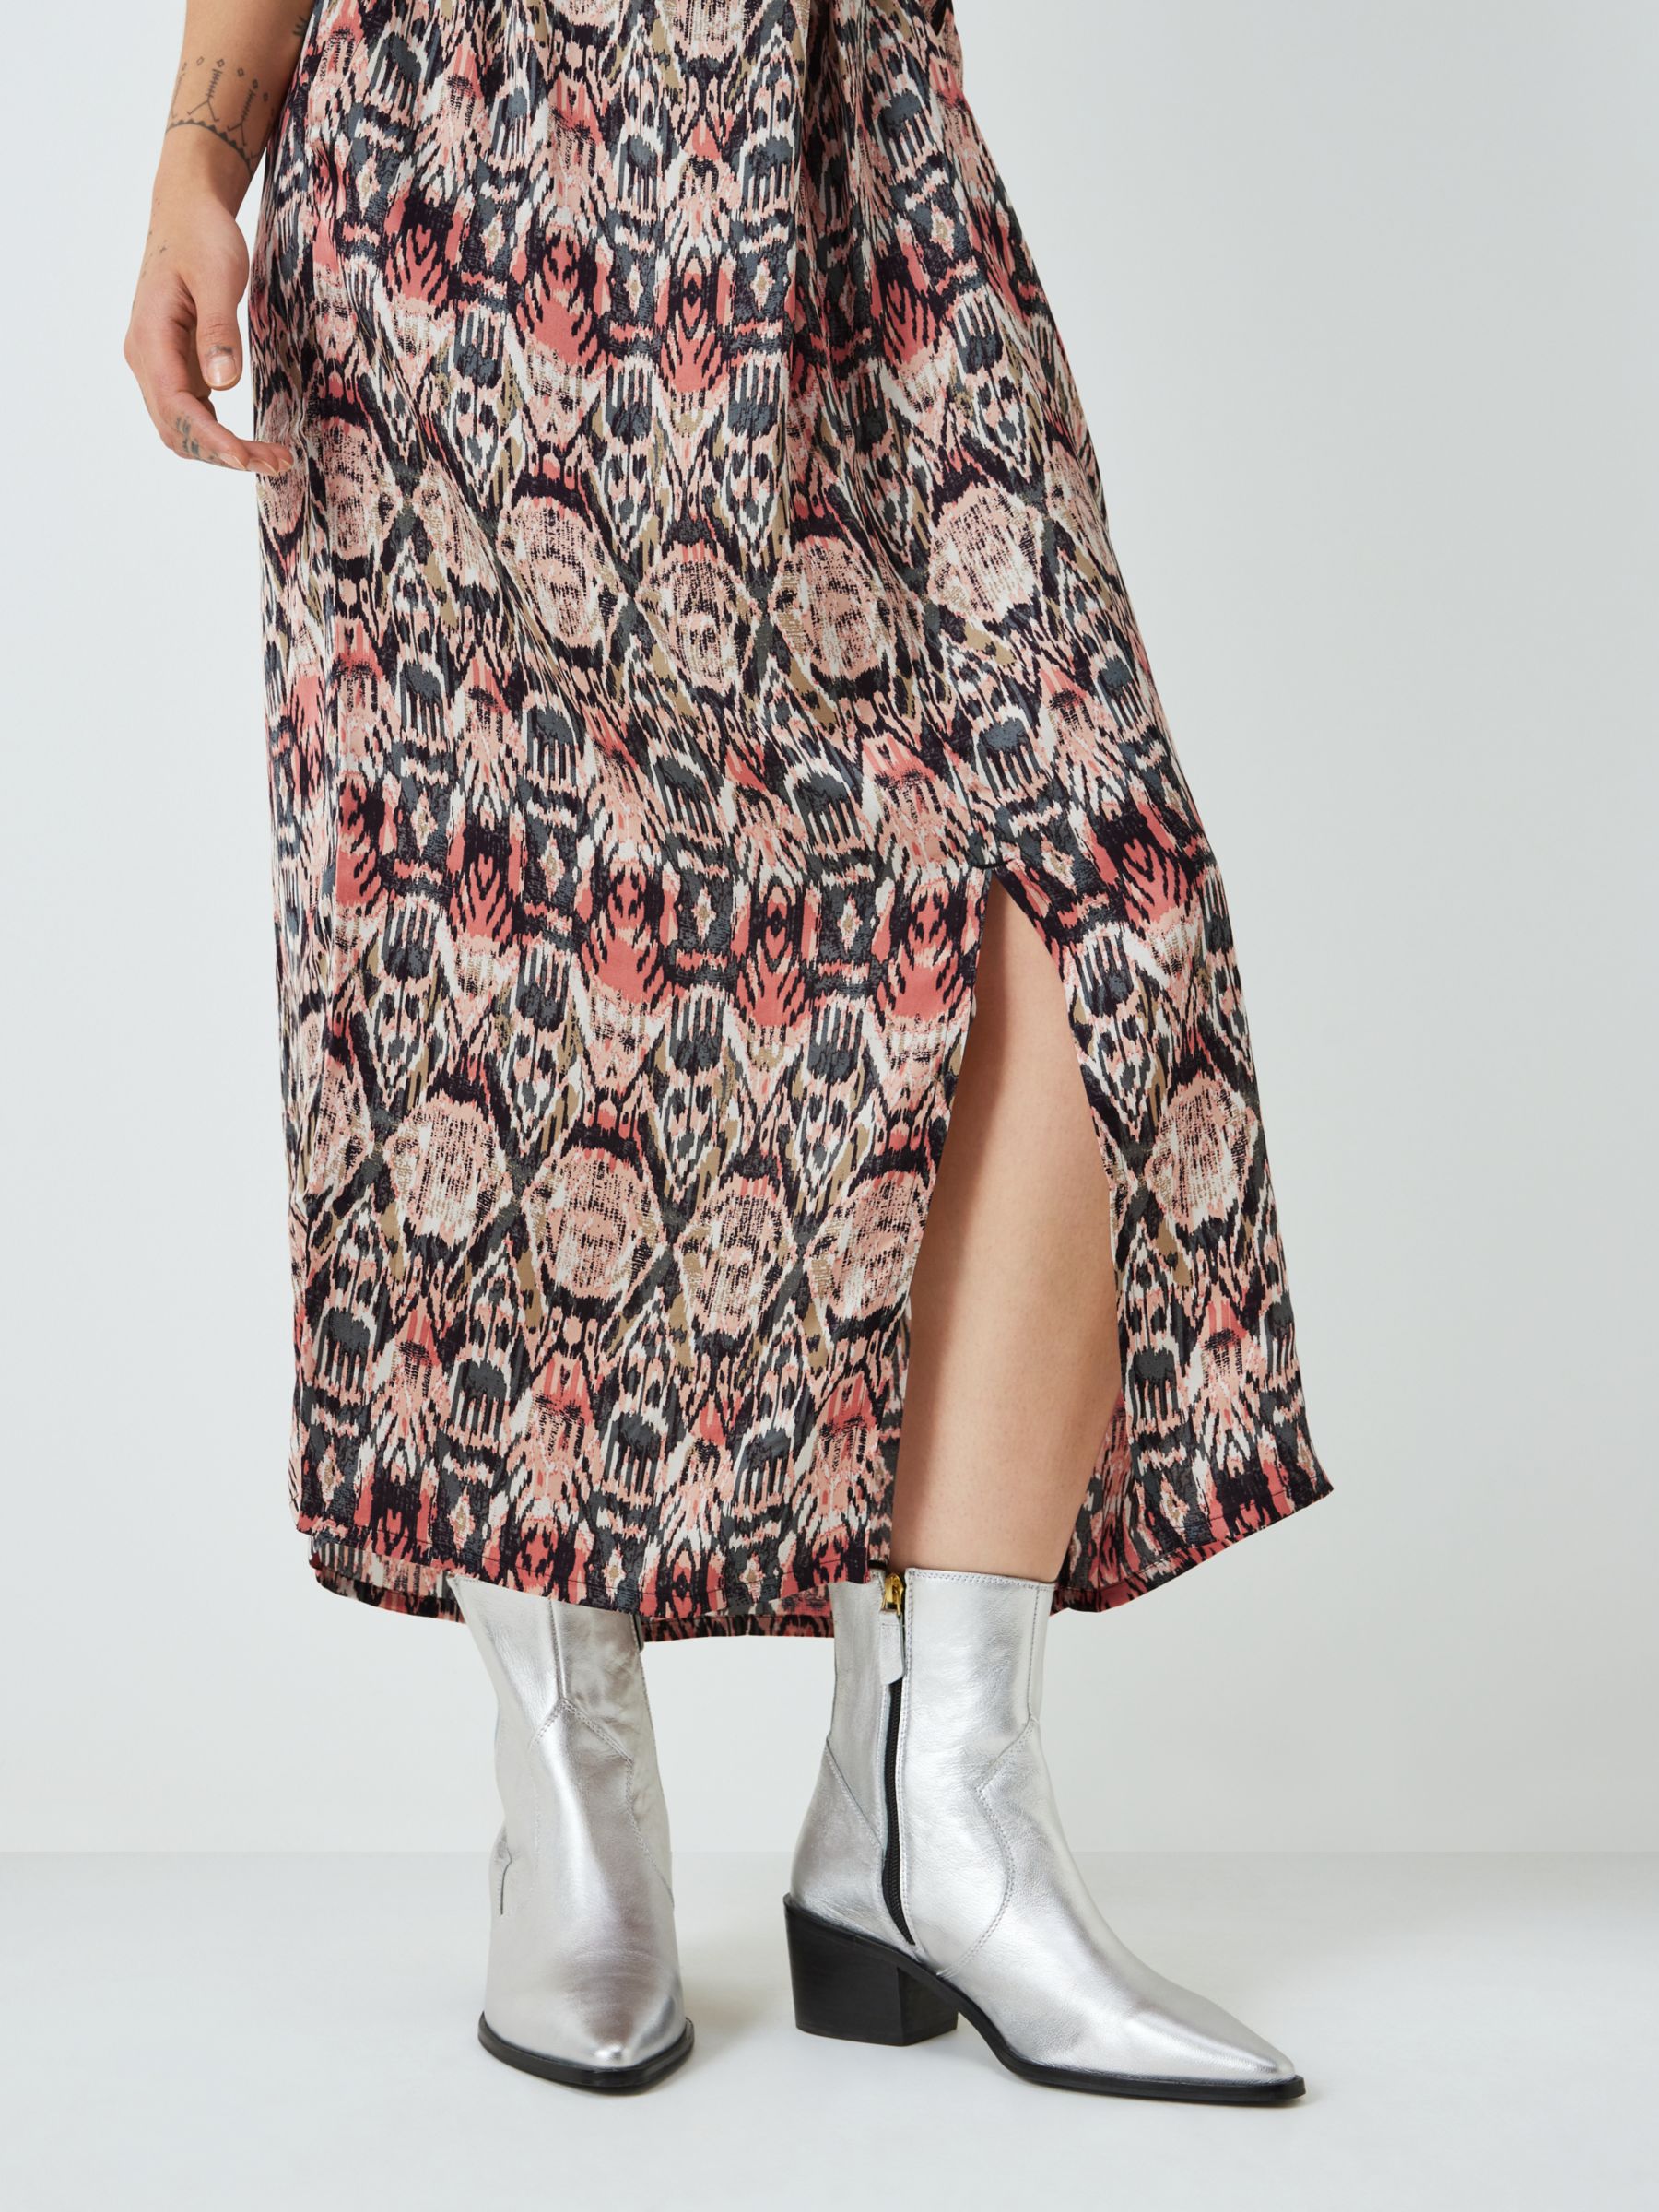 AND/OR Catlin Ikat Midi Skirt, Coral, 6